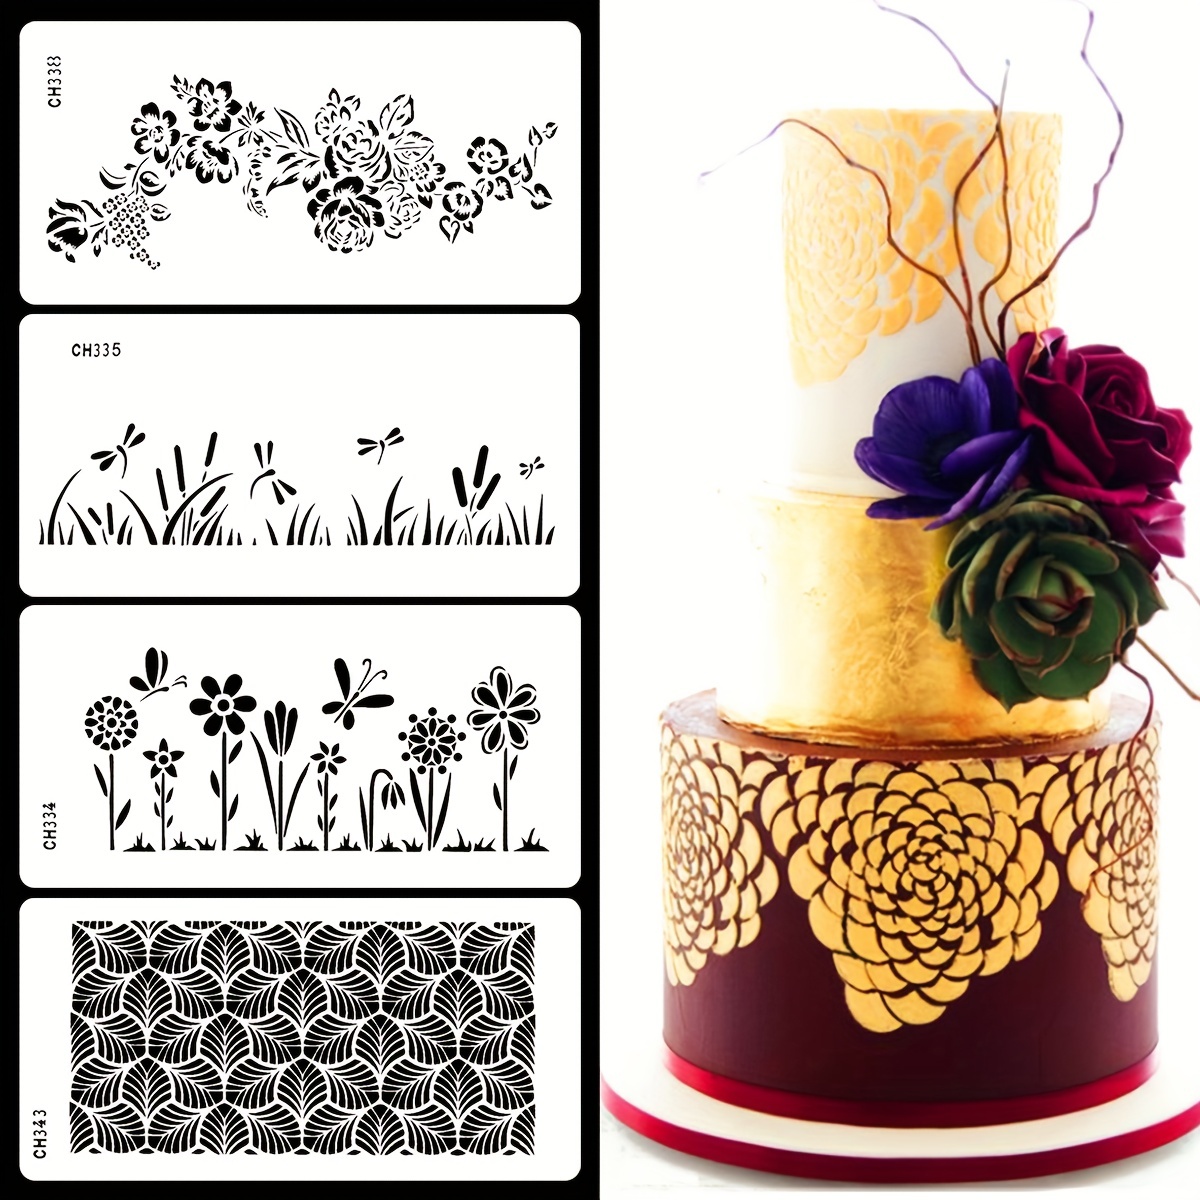 2 Methods To Decorate A Cake With A Stencil, Decorate Your Cake In Less  Than 5 Minutes